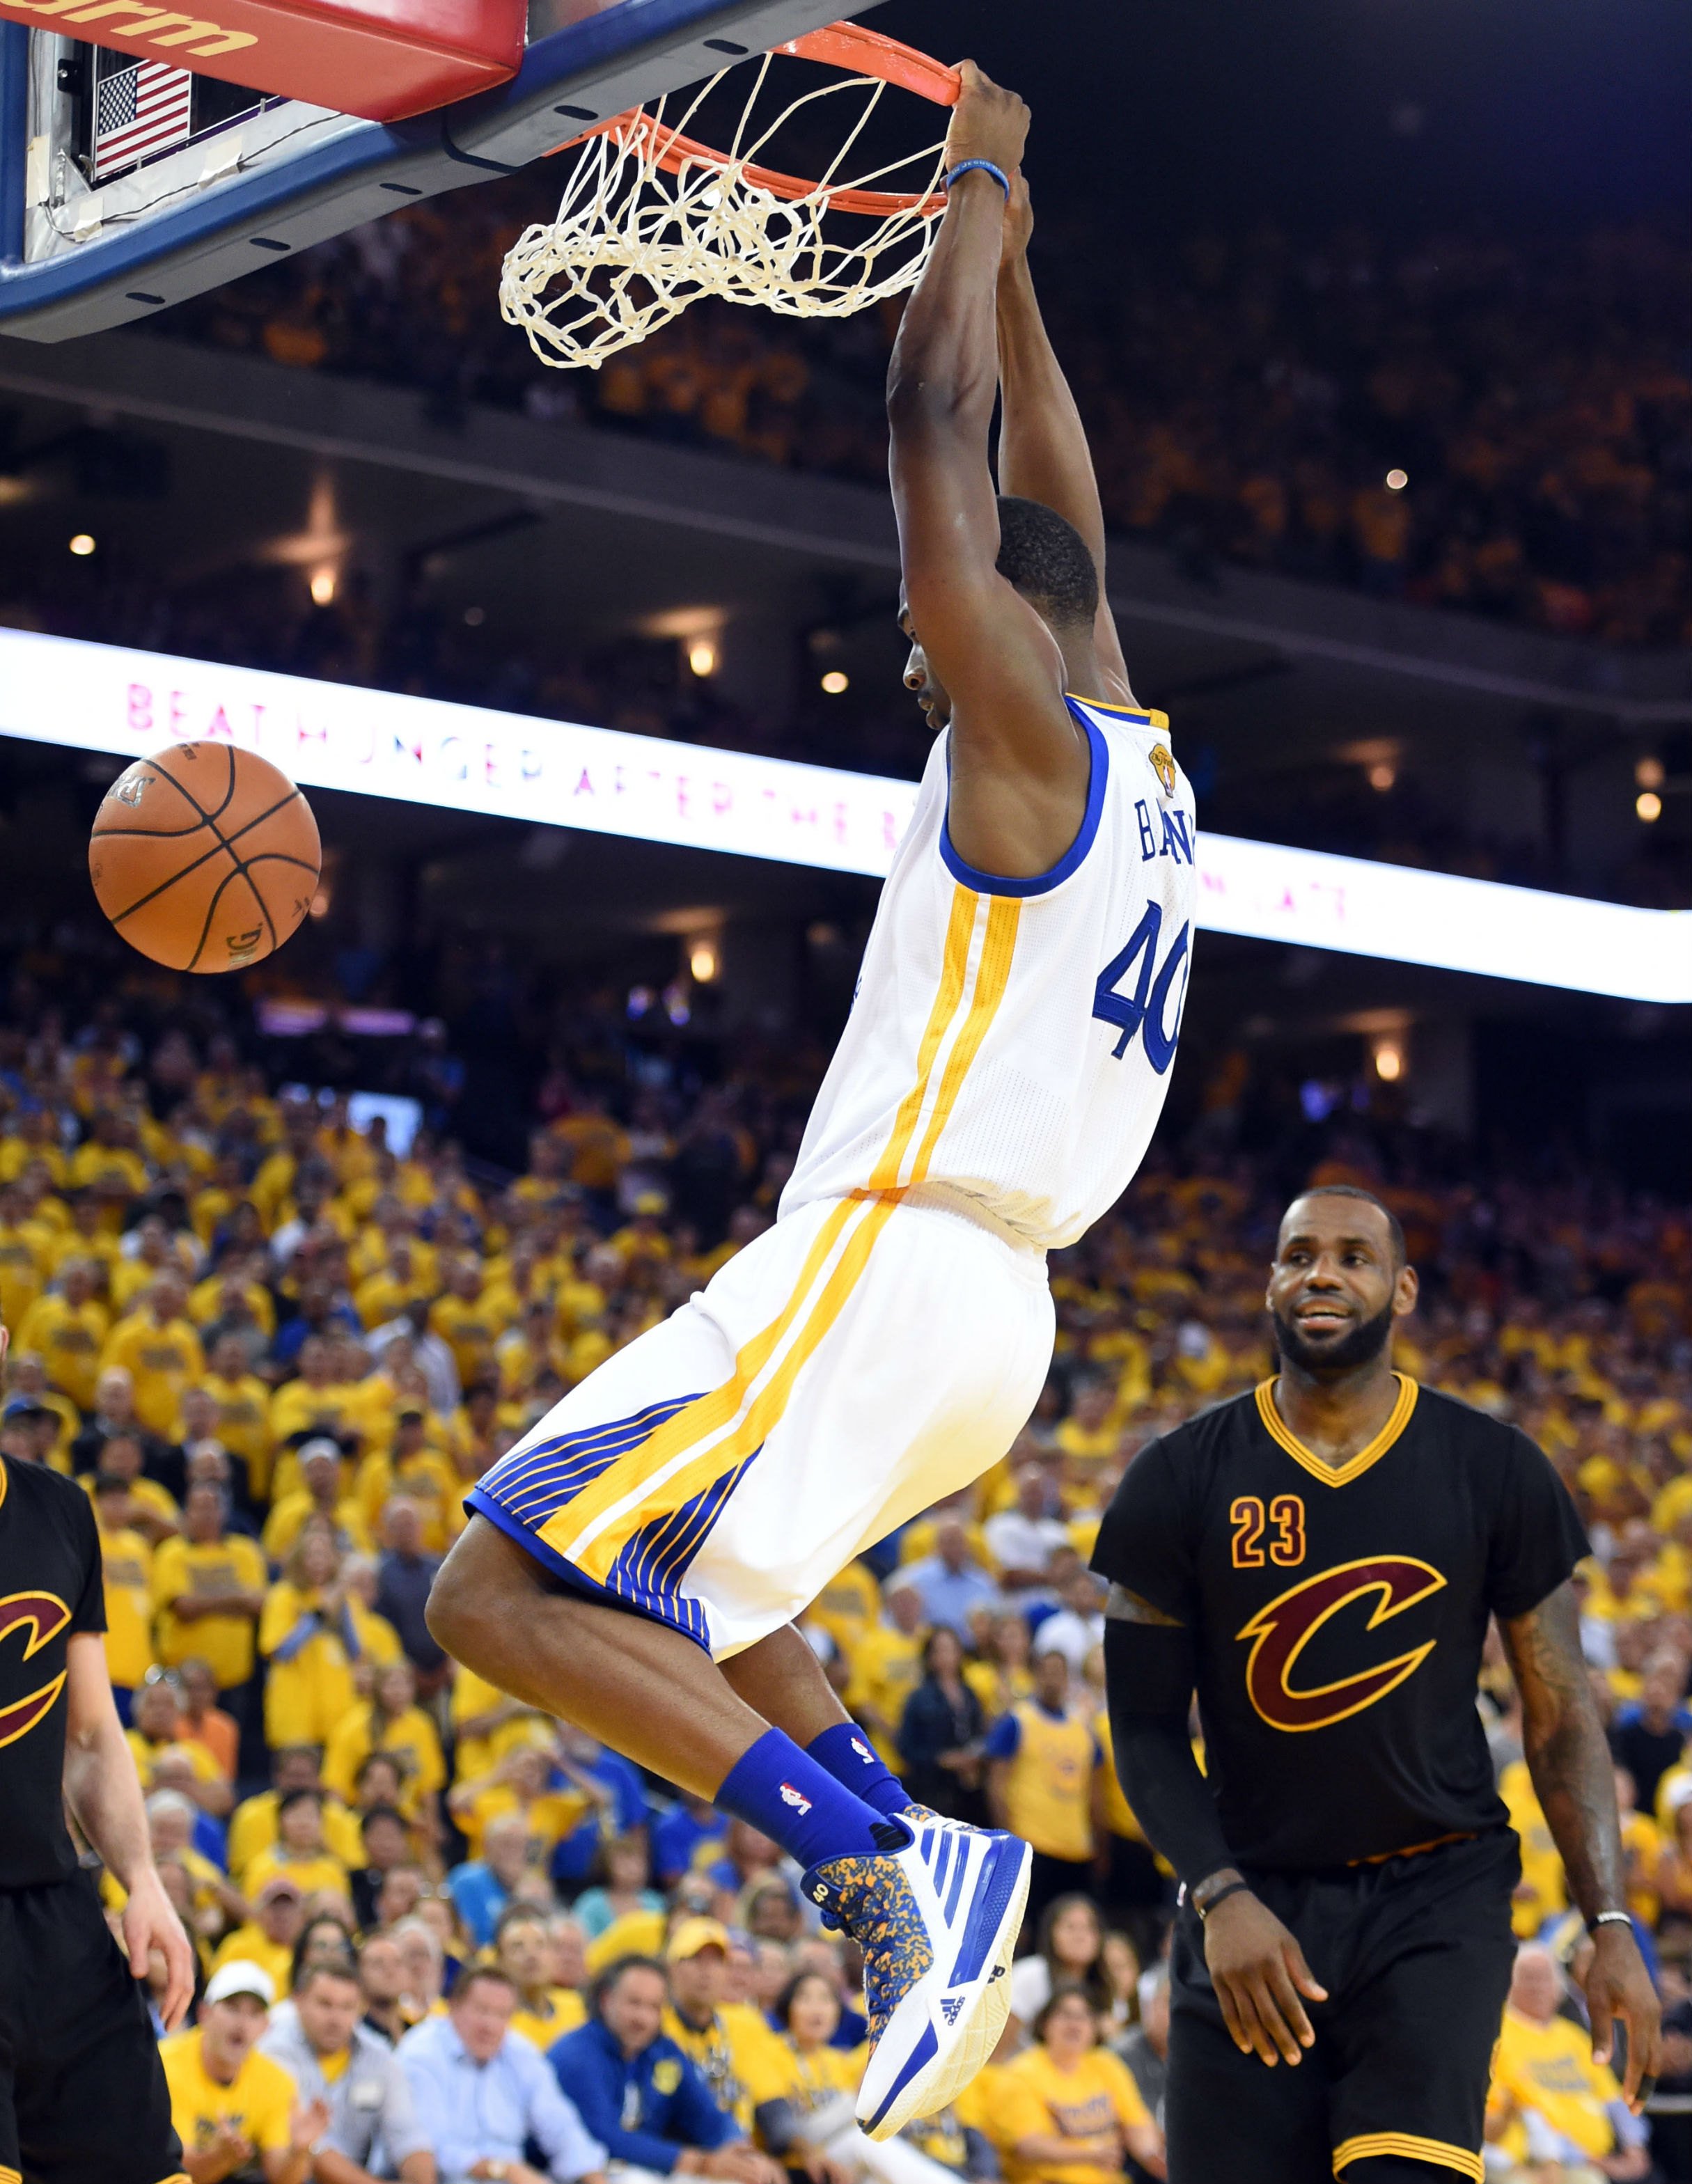 Harrison Barnes Wearing the adidas Light Em Up 2.0 in Game 7